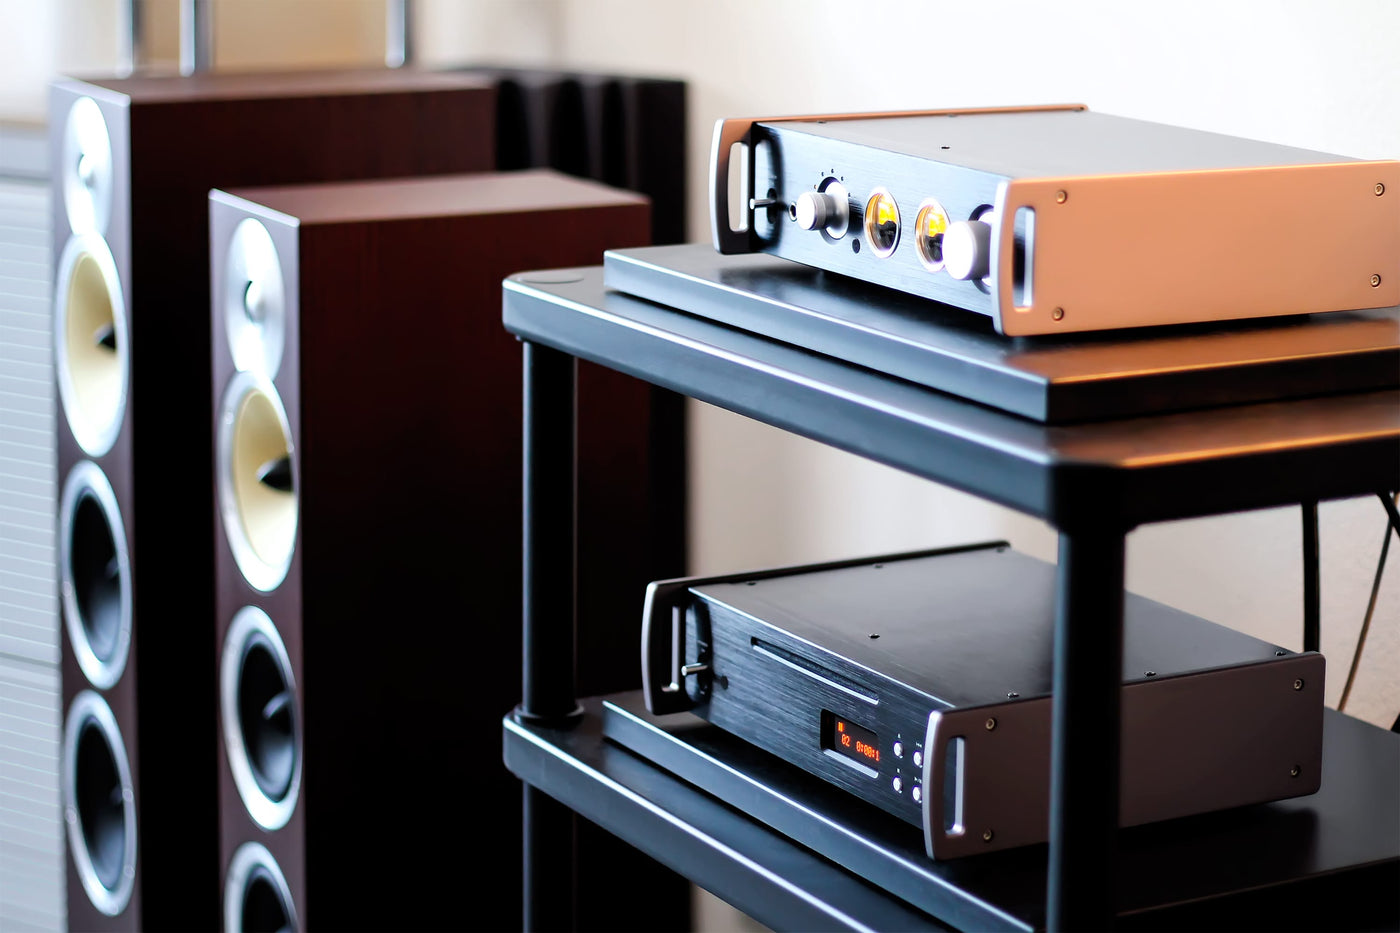 PCM Audio vs. Dolby Digital: Understanding the Differences for Stereo and Home Theatre